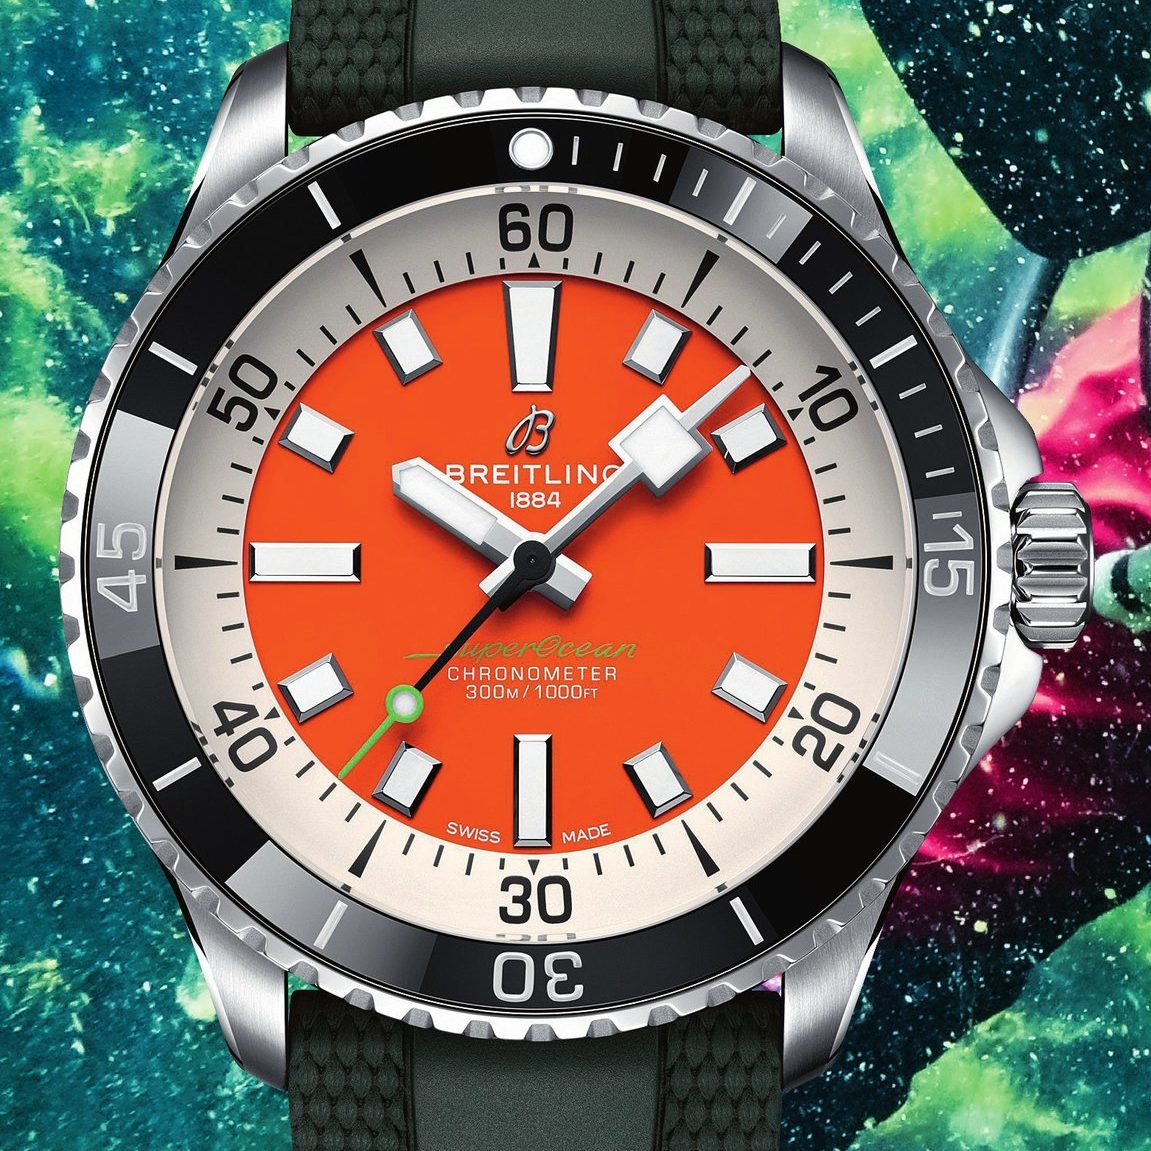 Modern Retro: The Breitling Superocean | WatchTime - USA's No.1 